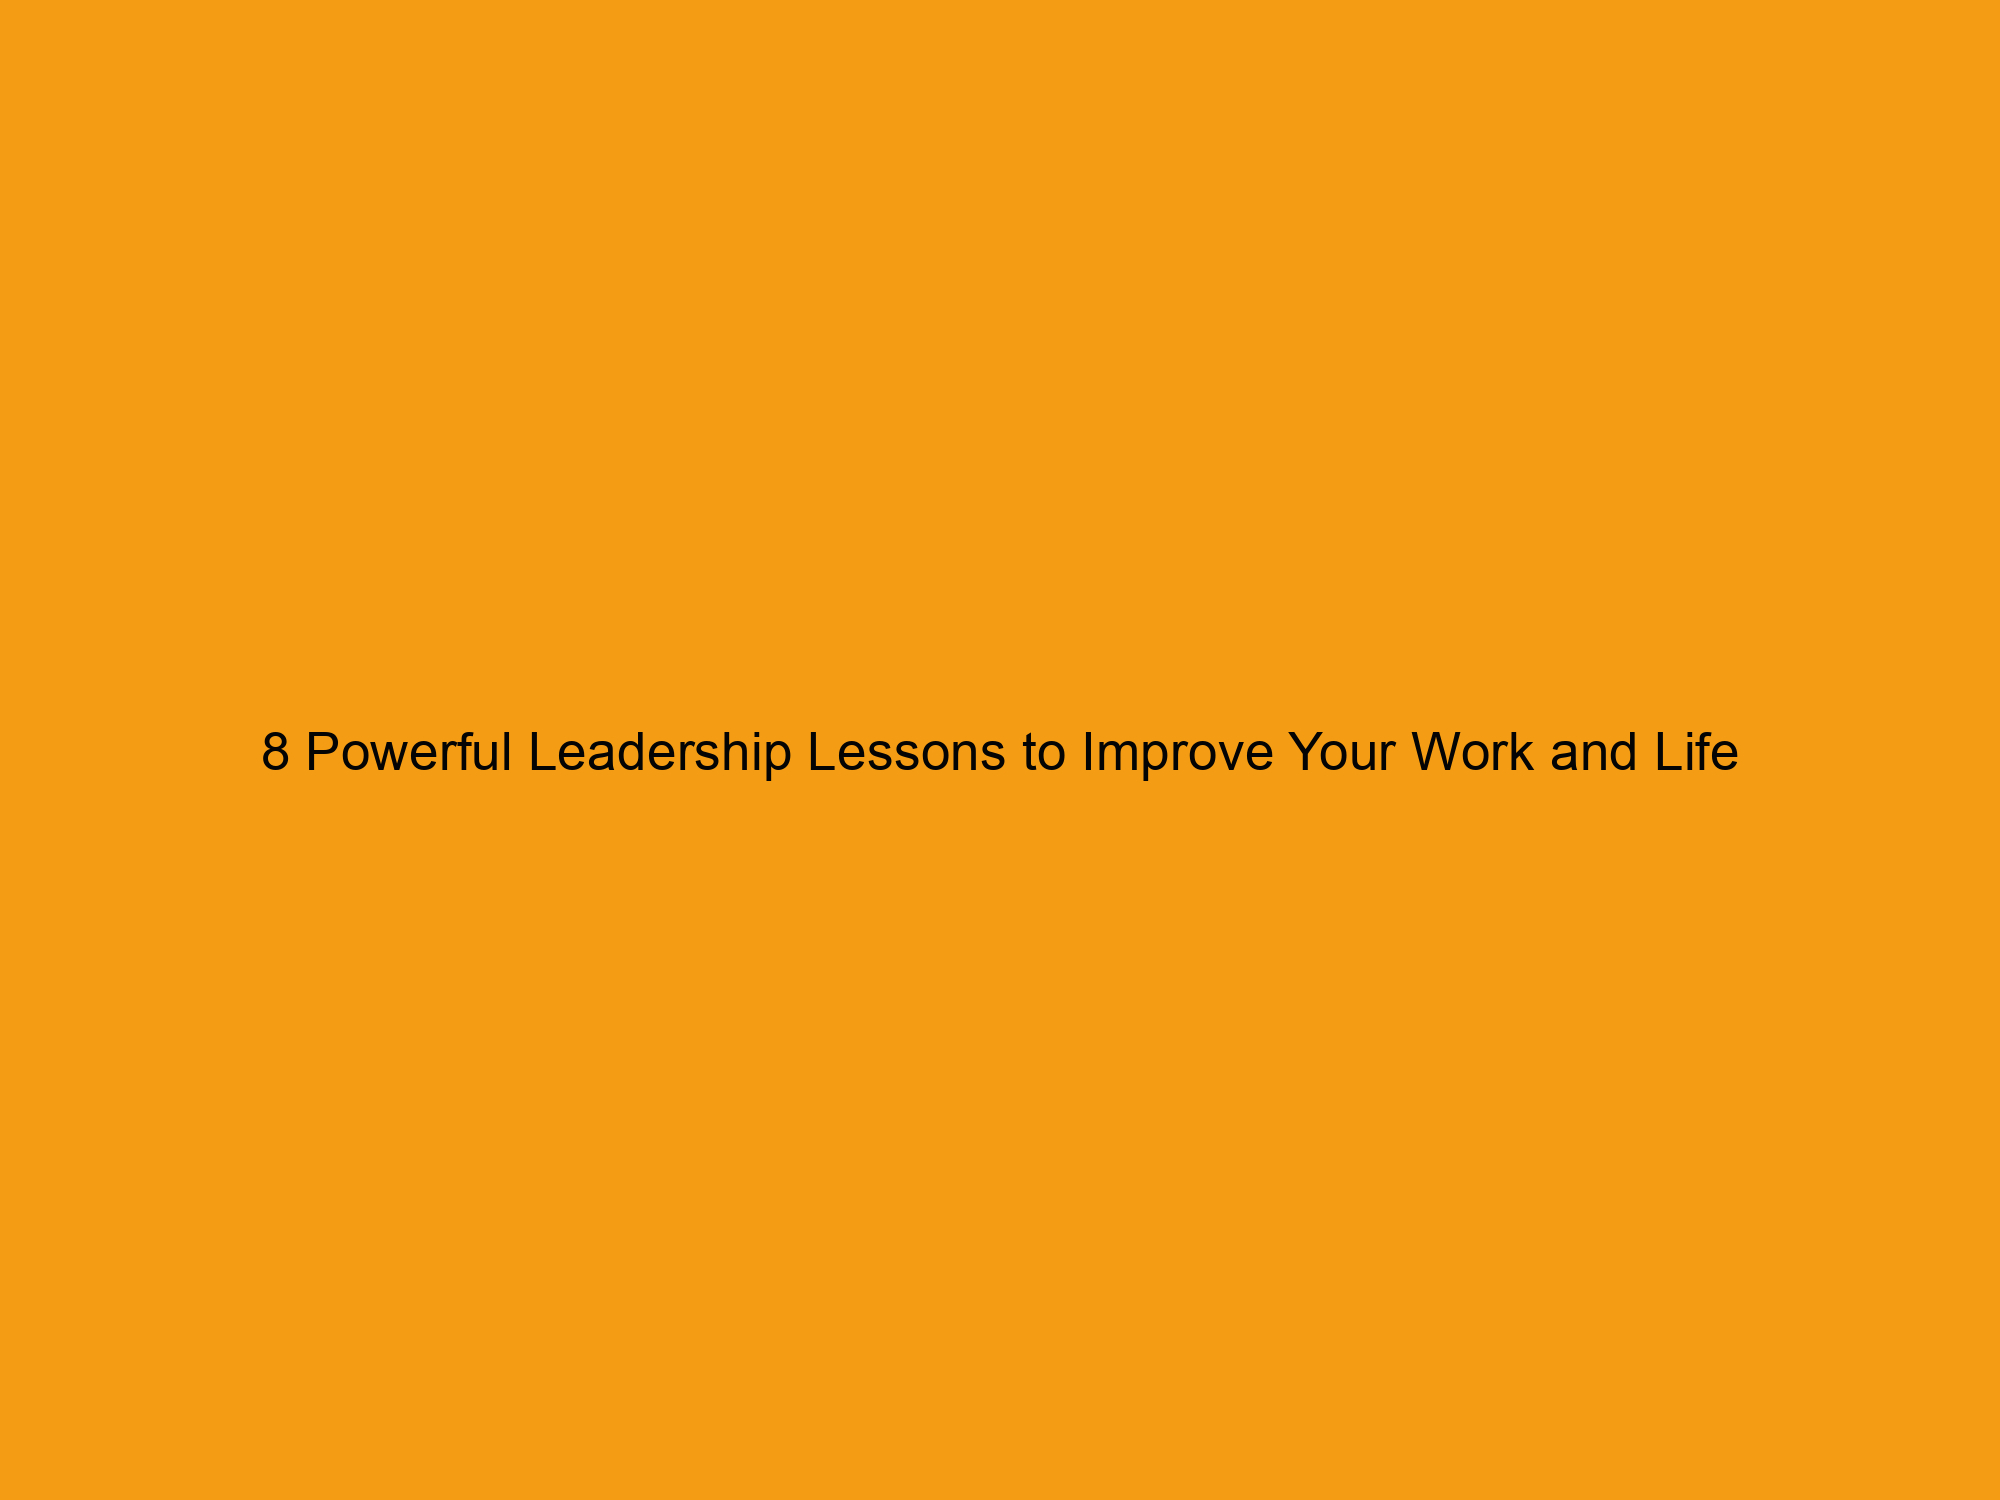 8 Powerful Leadership Lessons to Improve Your Work and Life